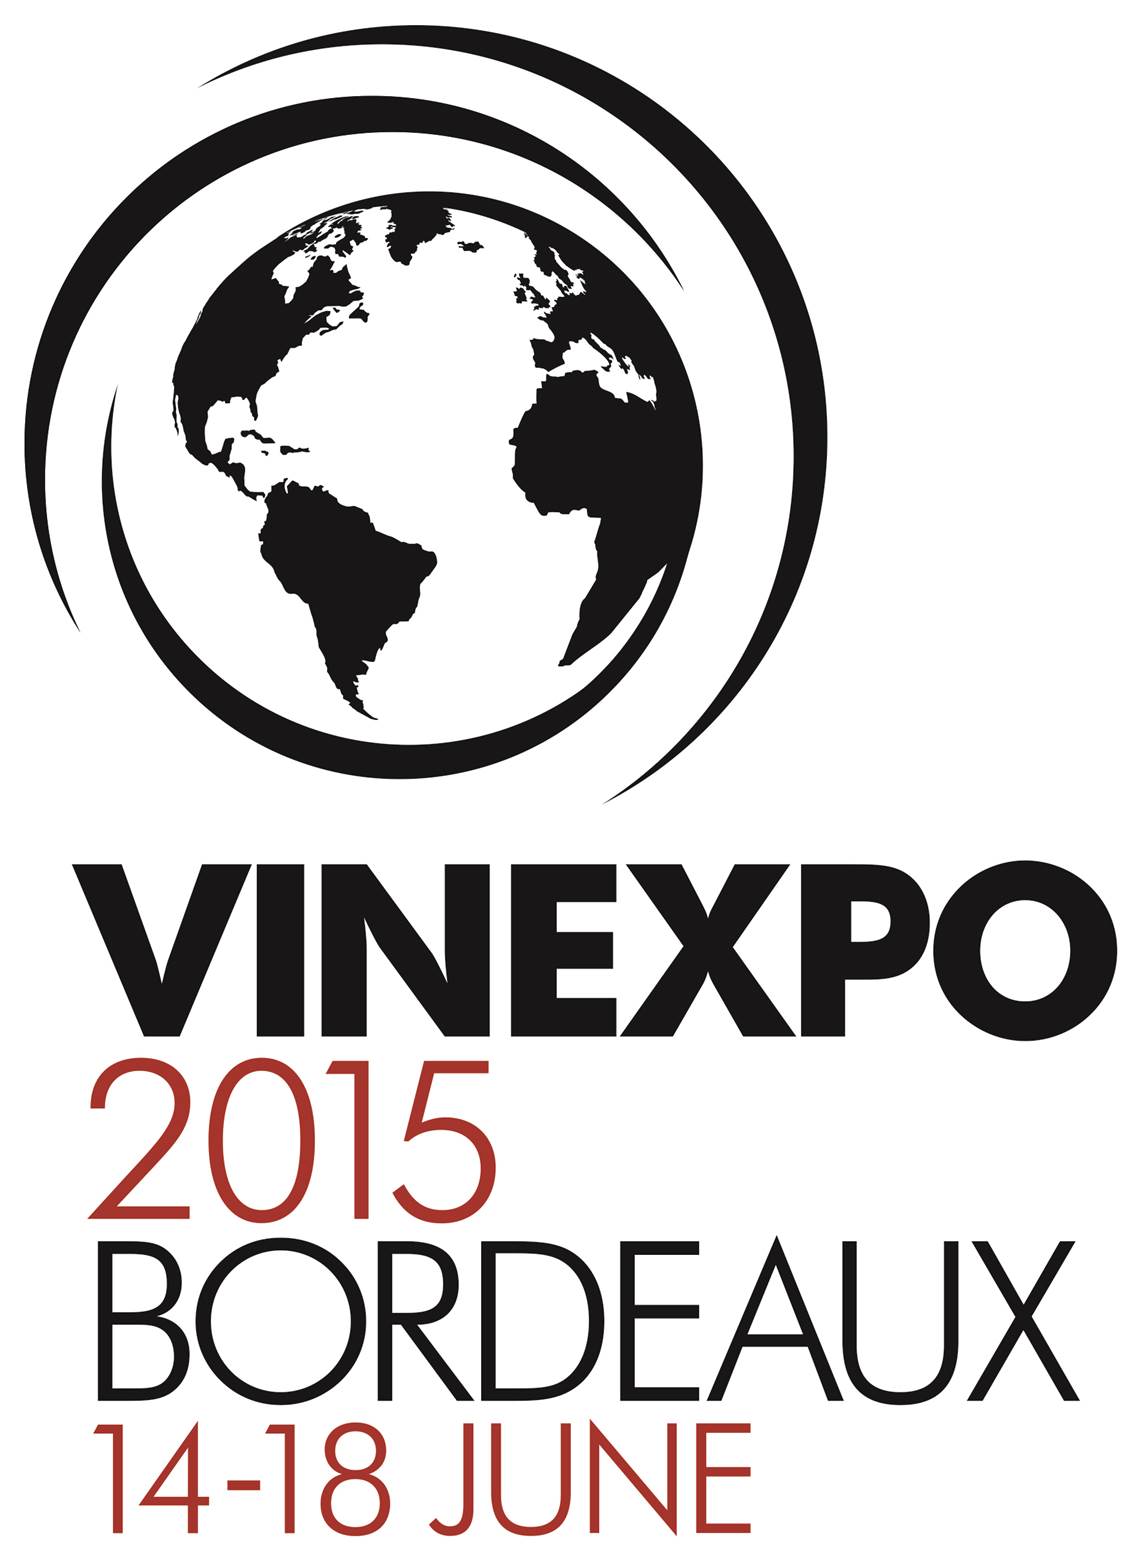 VinEXPO 2015 in a few days